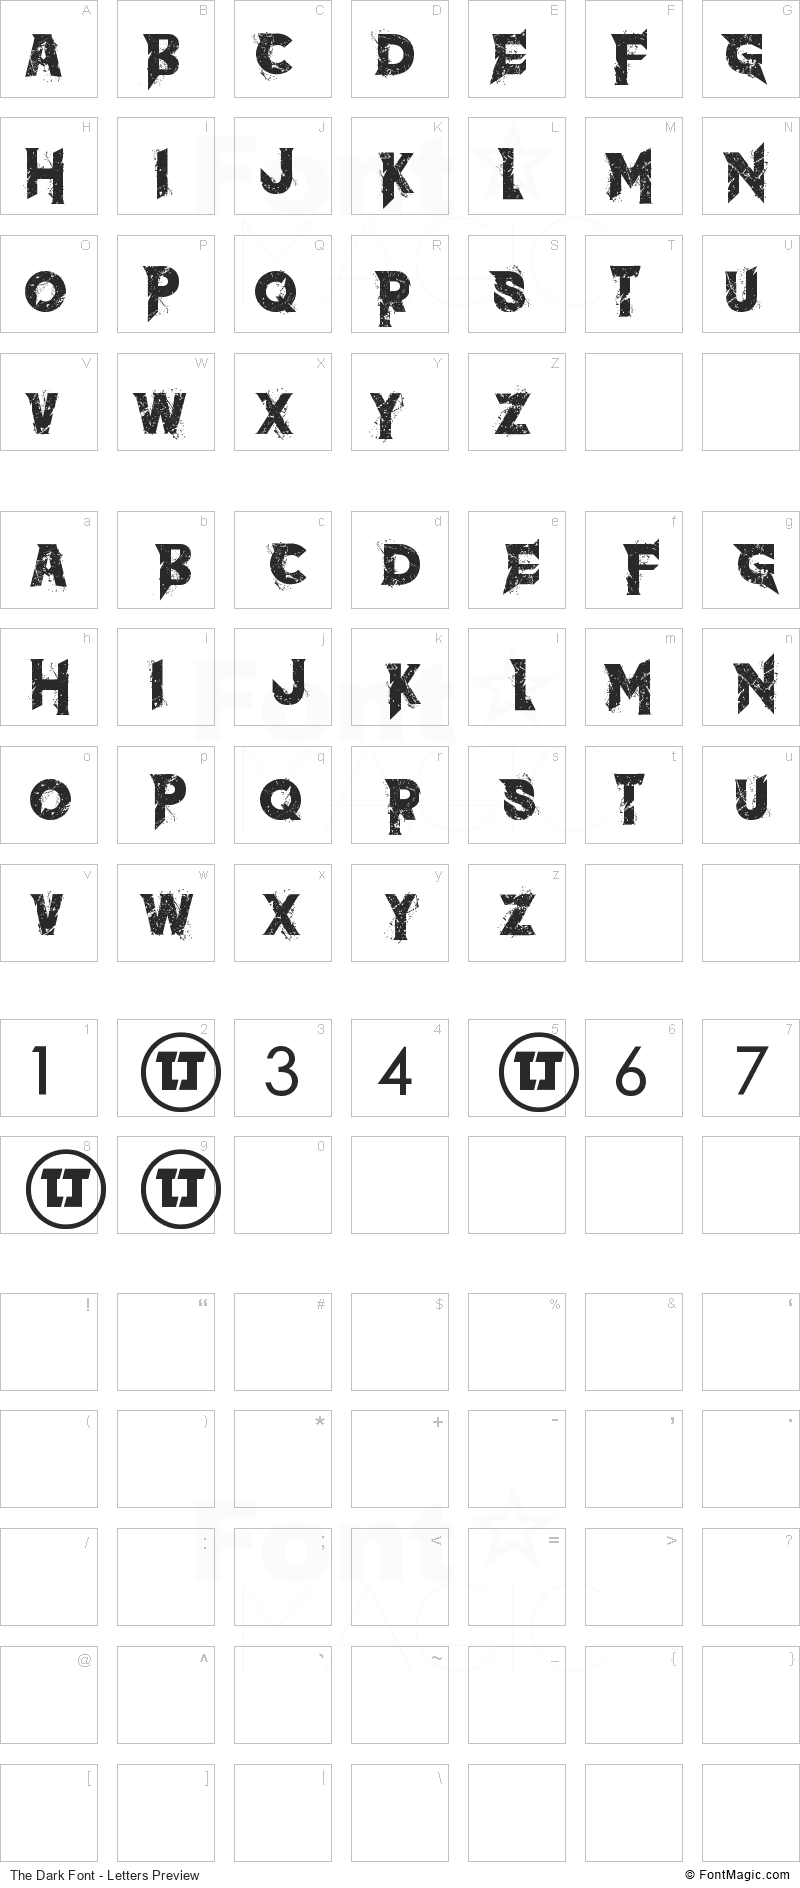 The Dark Font - All Latters Preview Chart